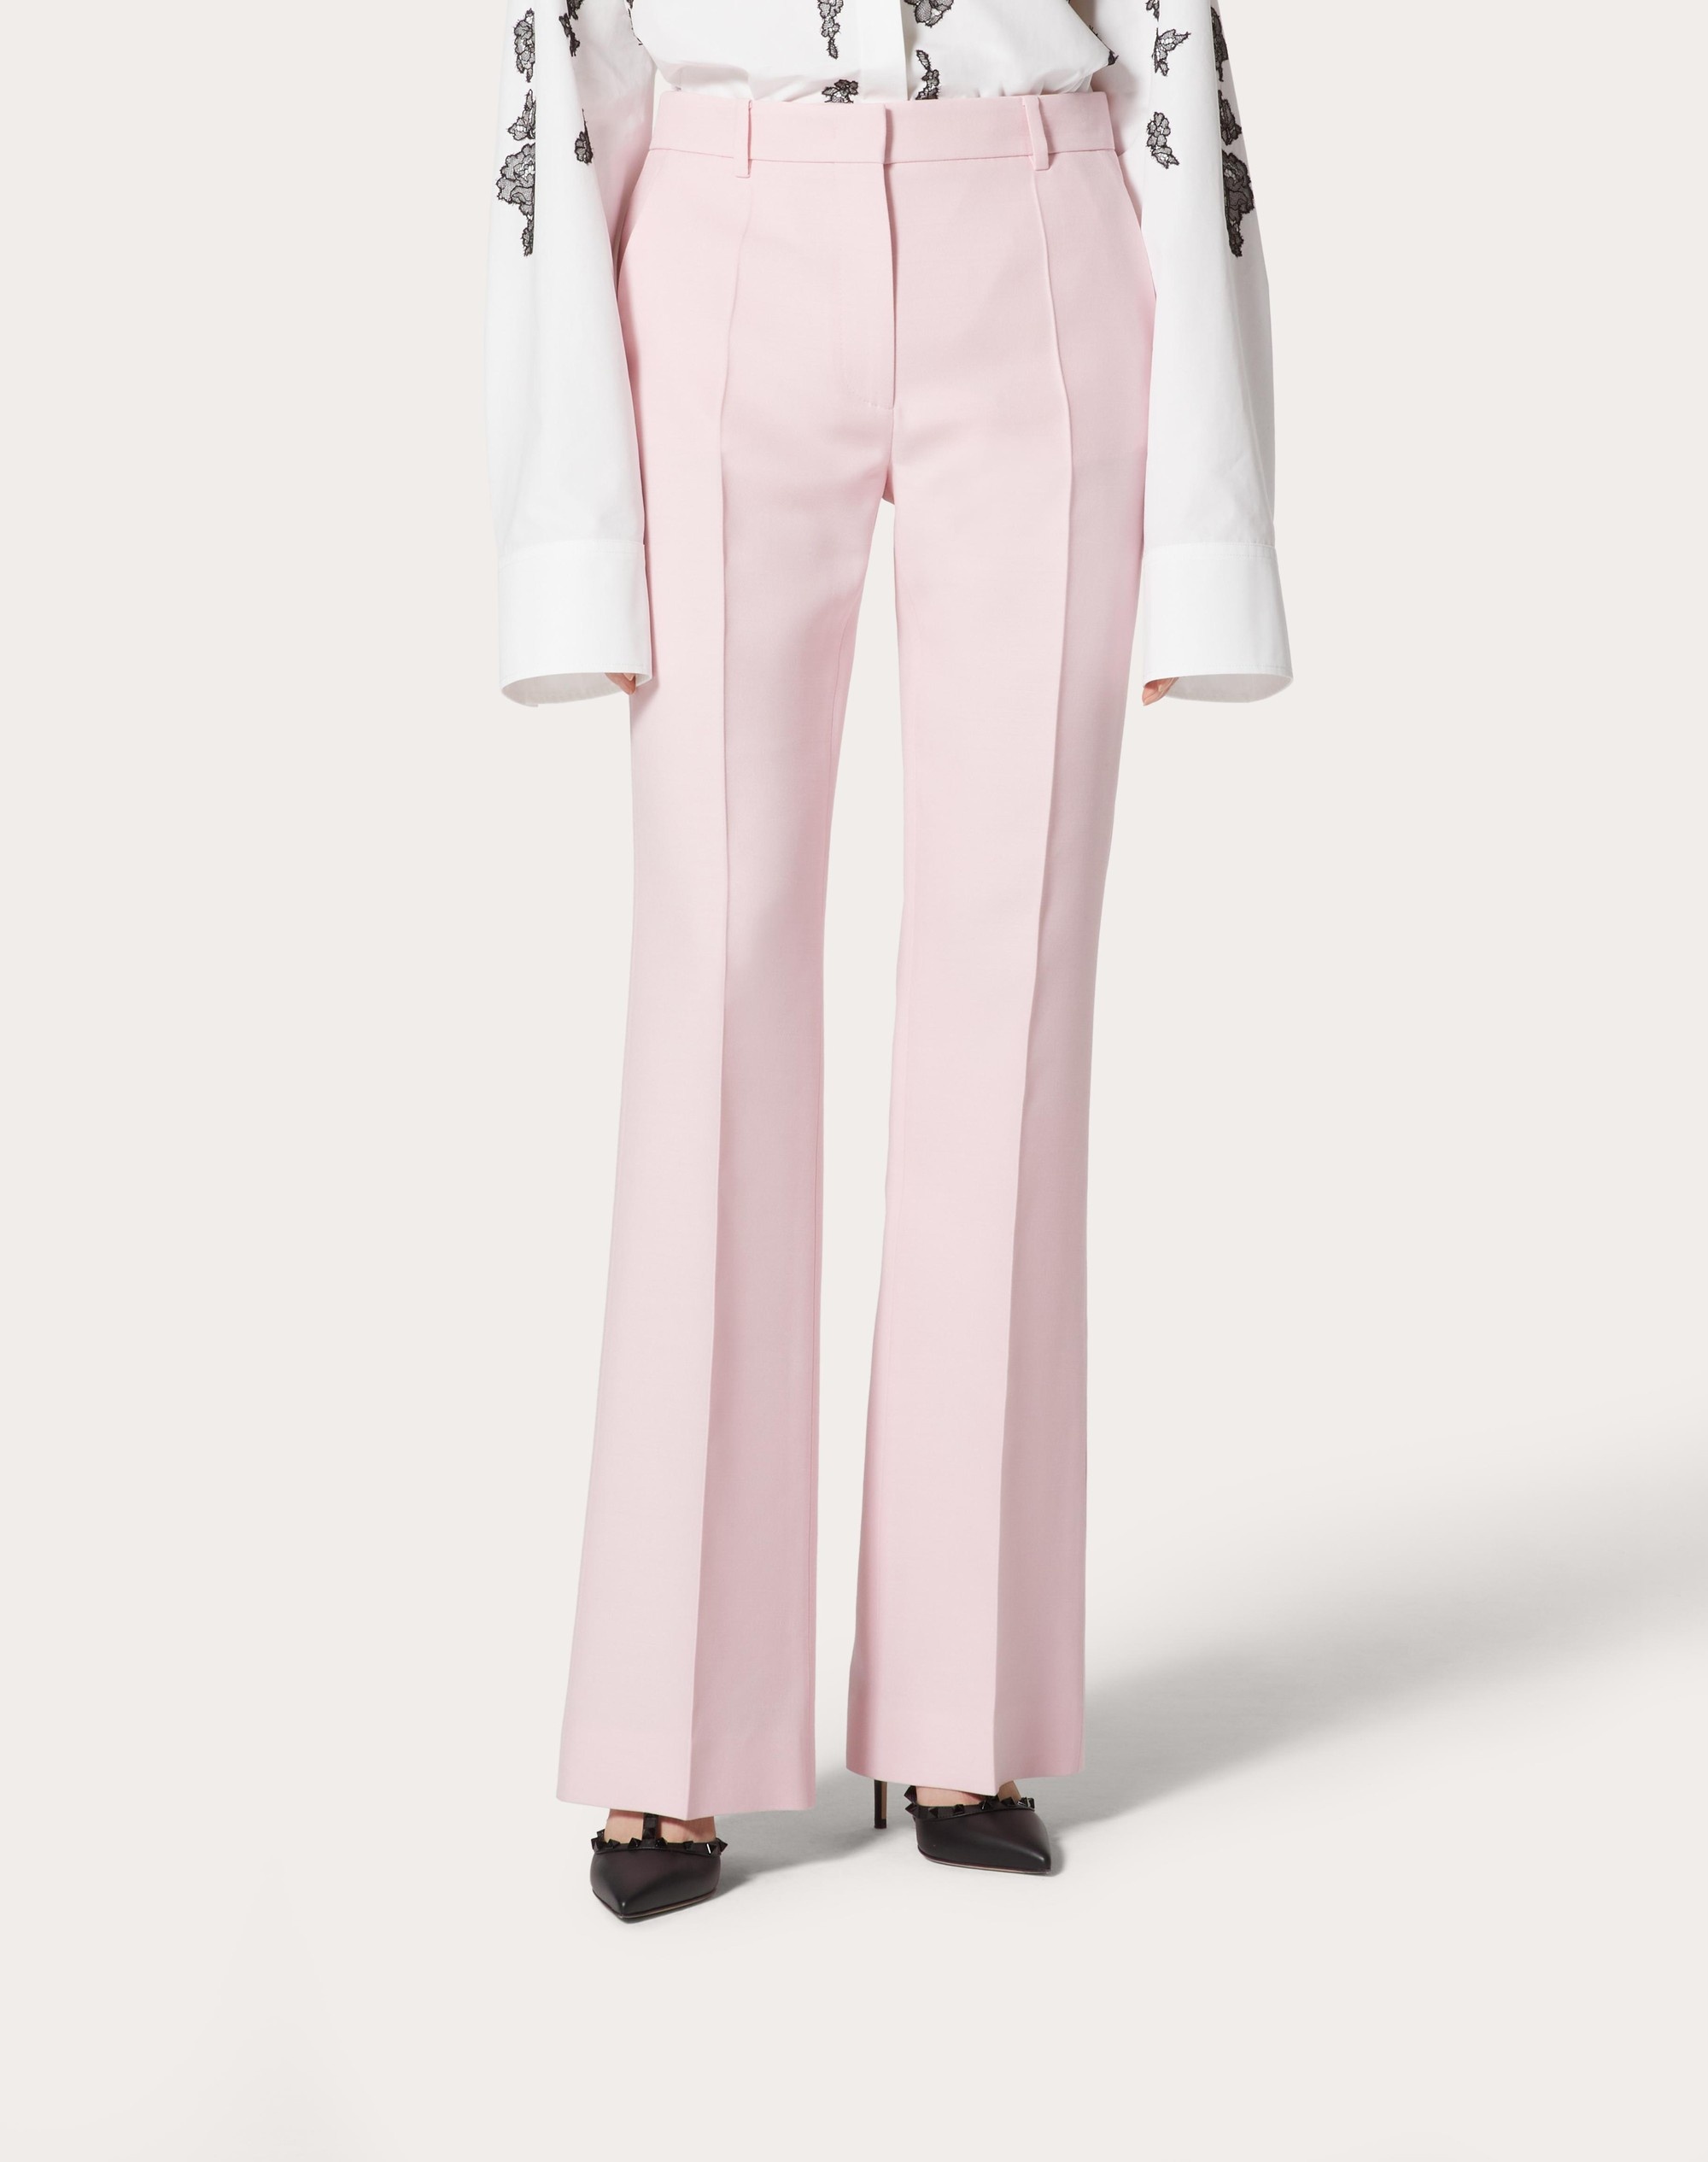 CREPE COUTURE TROUSERS - 3